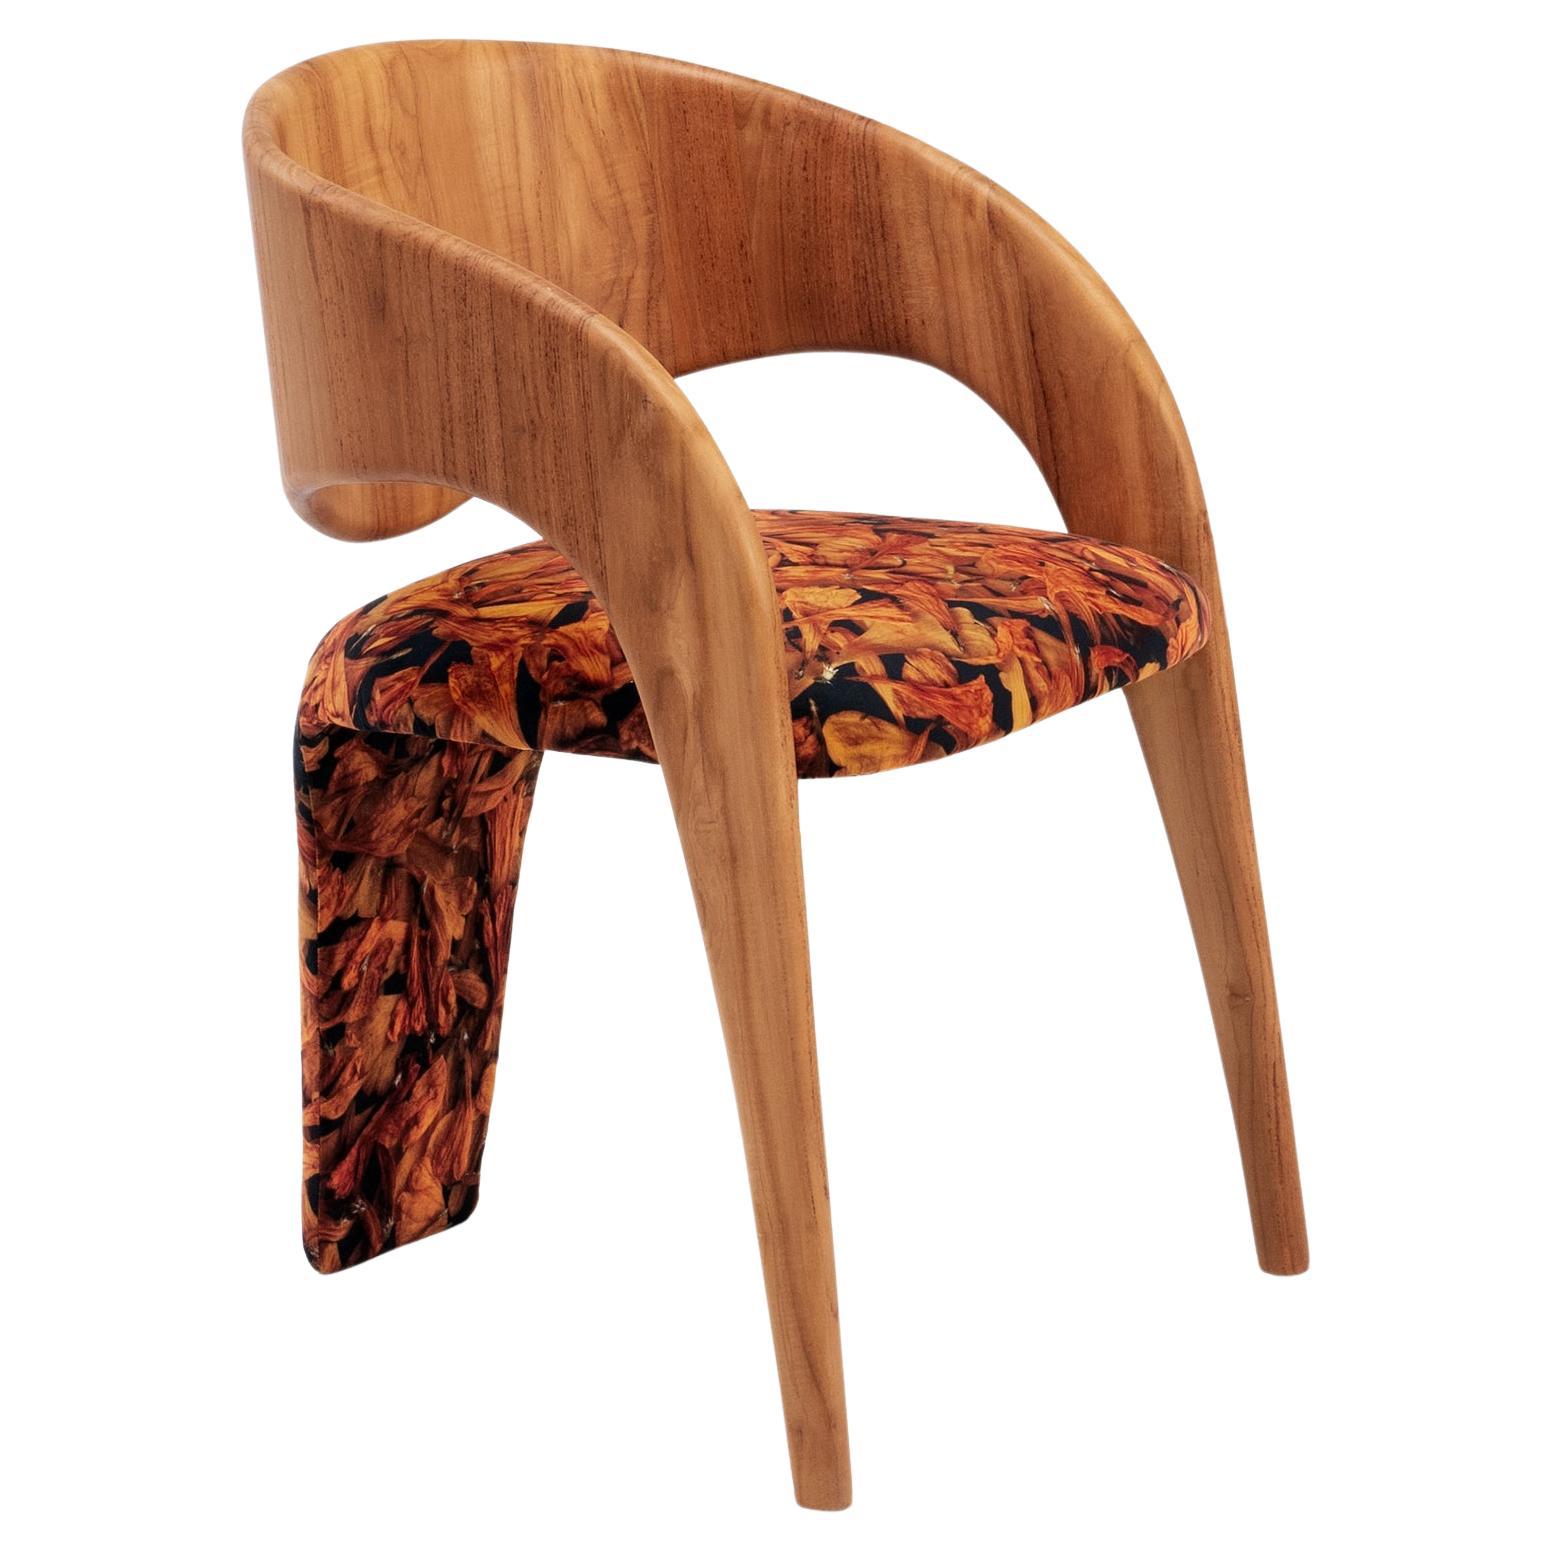 Papaya Eater • Hand-Carved Solid Wood Chair by Odditi For Sale